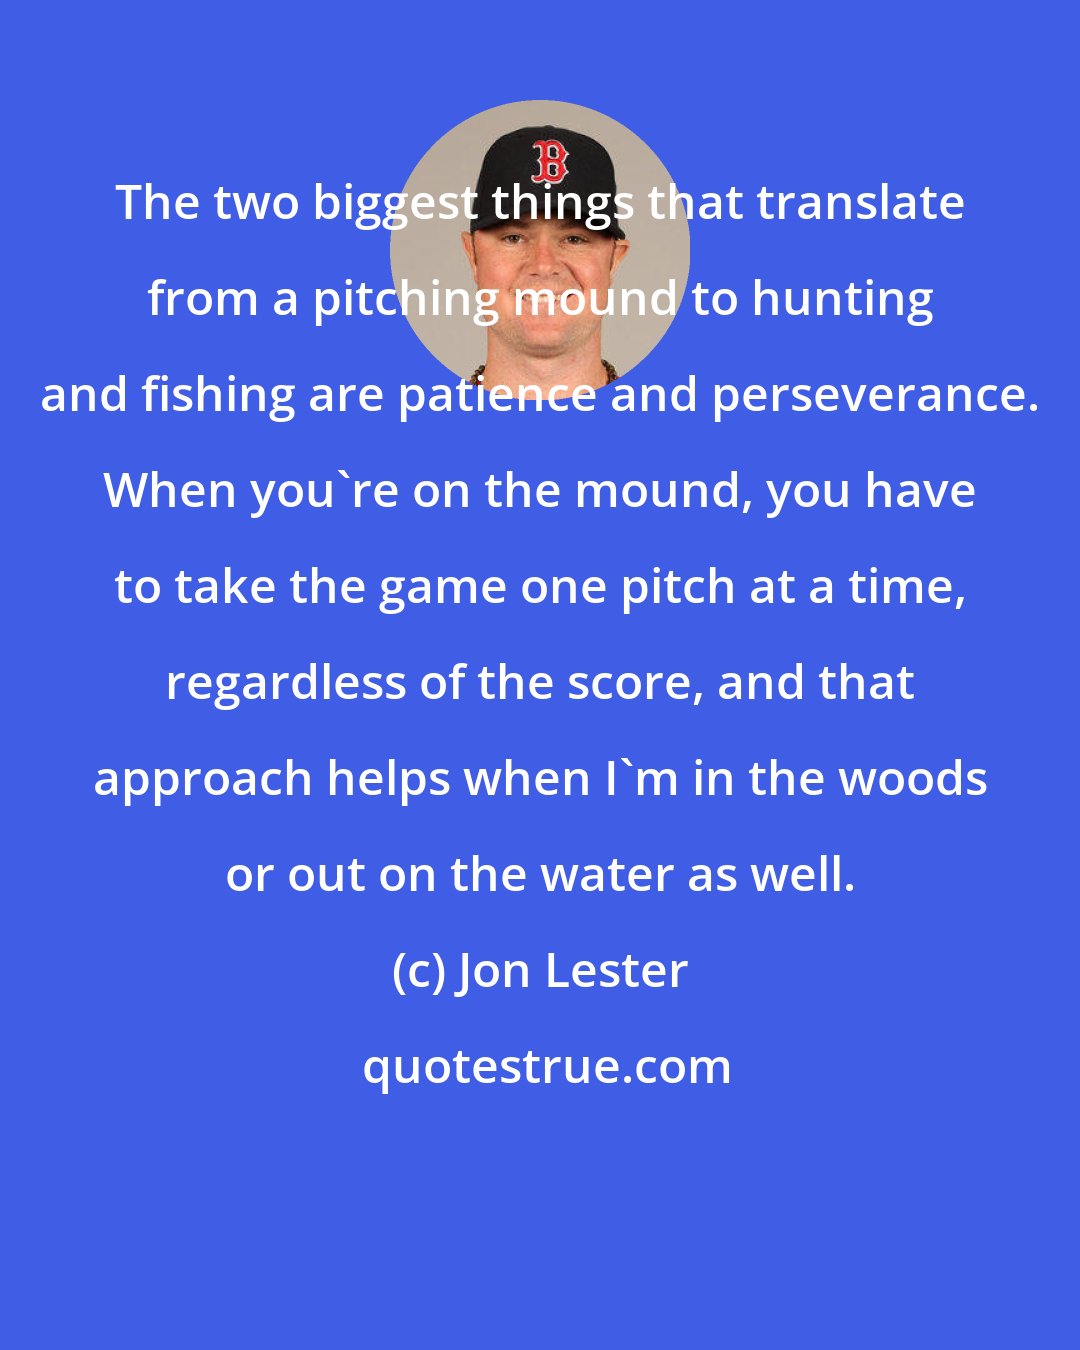 Jon Lester: The two biggest things that translate from a pitching mound to hunting and fishing are patience and perseverance. When you're on the mound, you have to take the game one pitch at a time, regardless of the score, and that approach helps when I'm in the woods or out on the water as well.